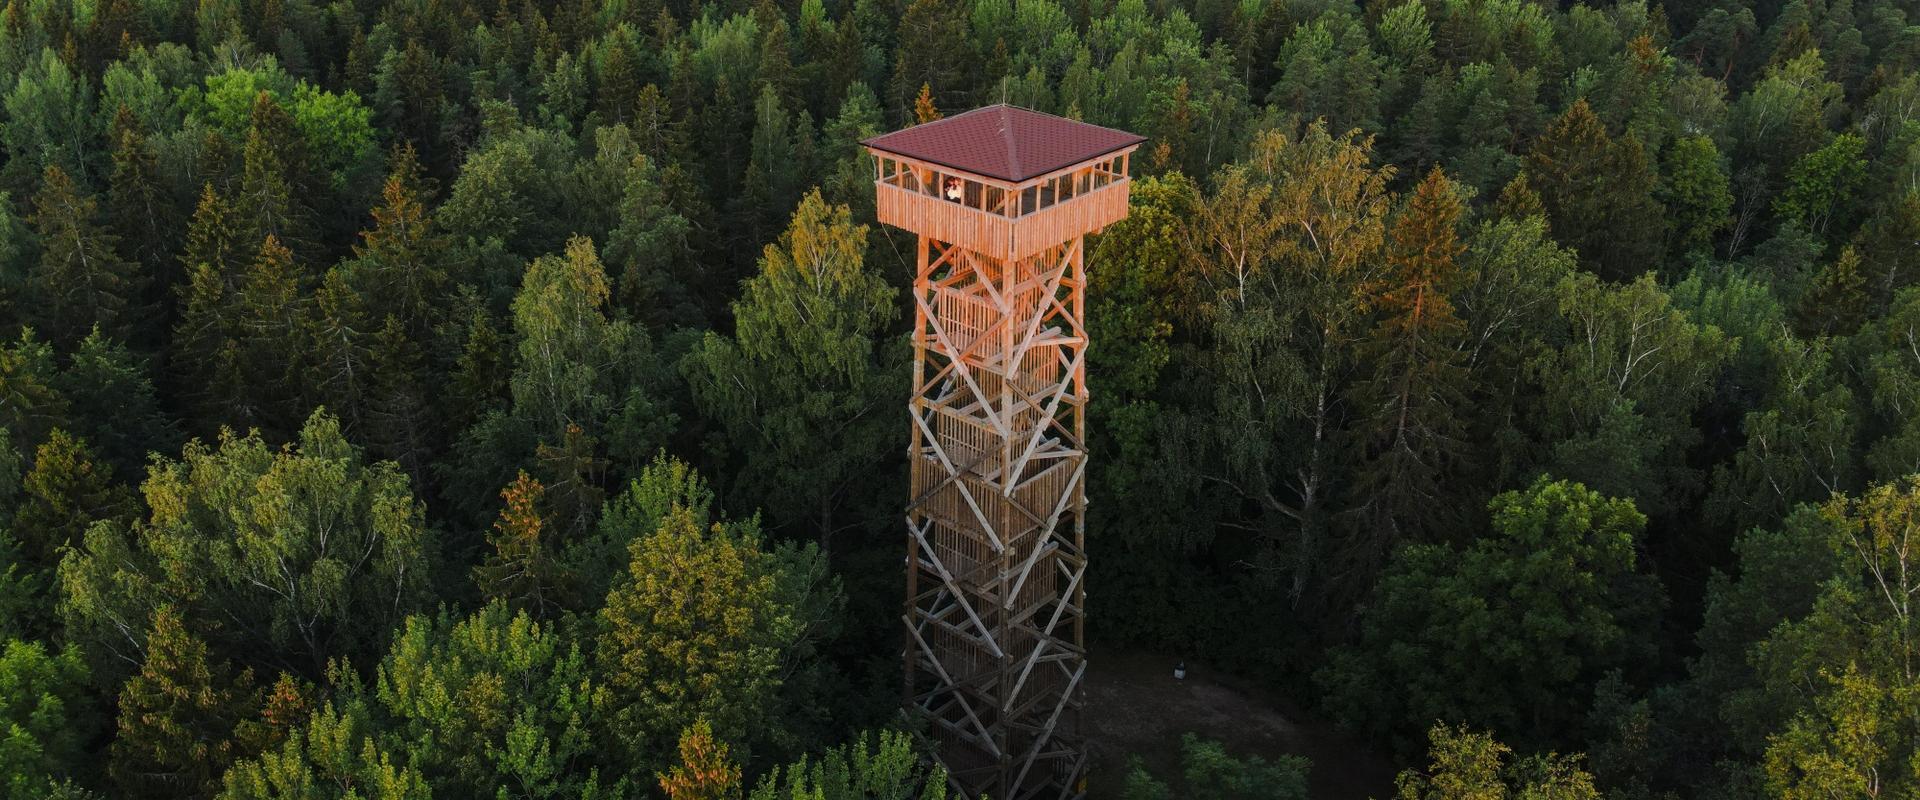 Tärivere hill – the highest natural point in Ida-Viru County – is home to the Iisaku viewing tower, which is 28 metres high. Situated 122 metres above